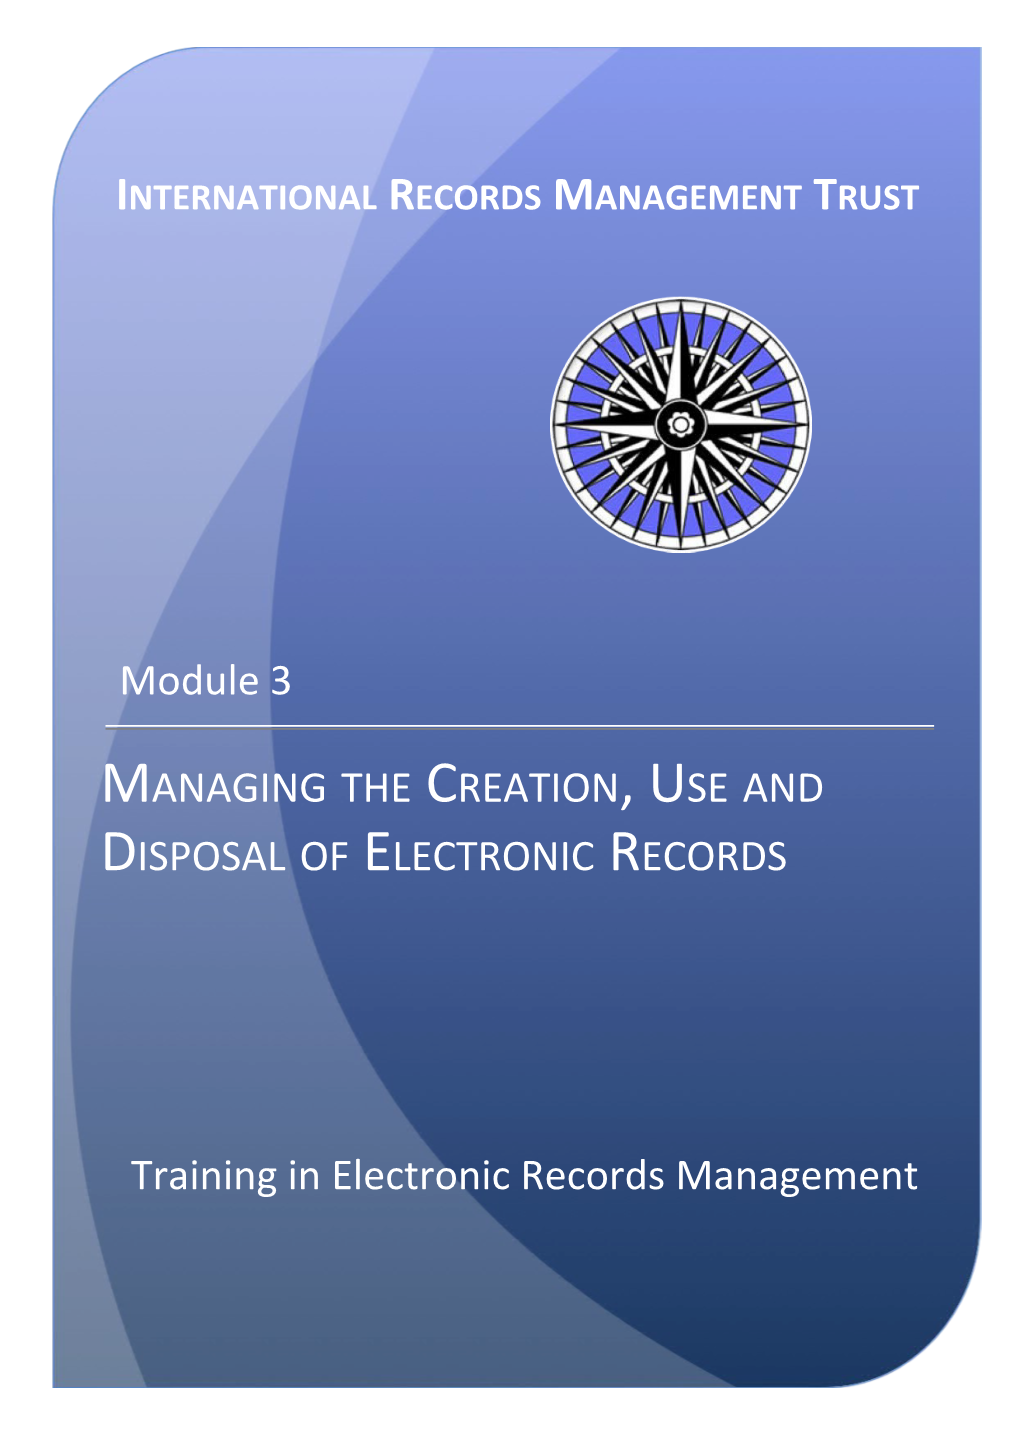 Training in Electronic Records Management